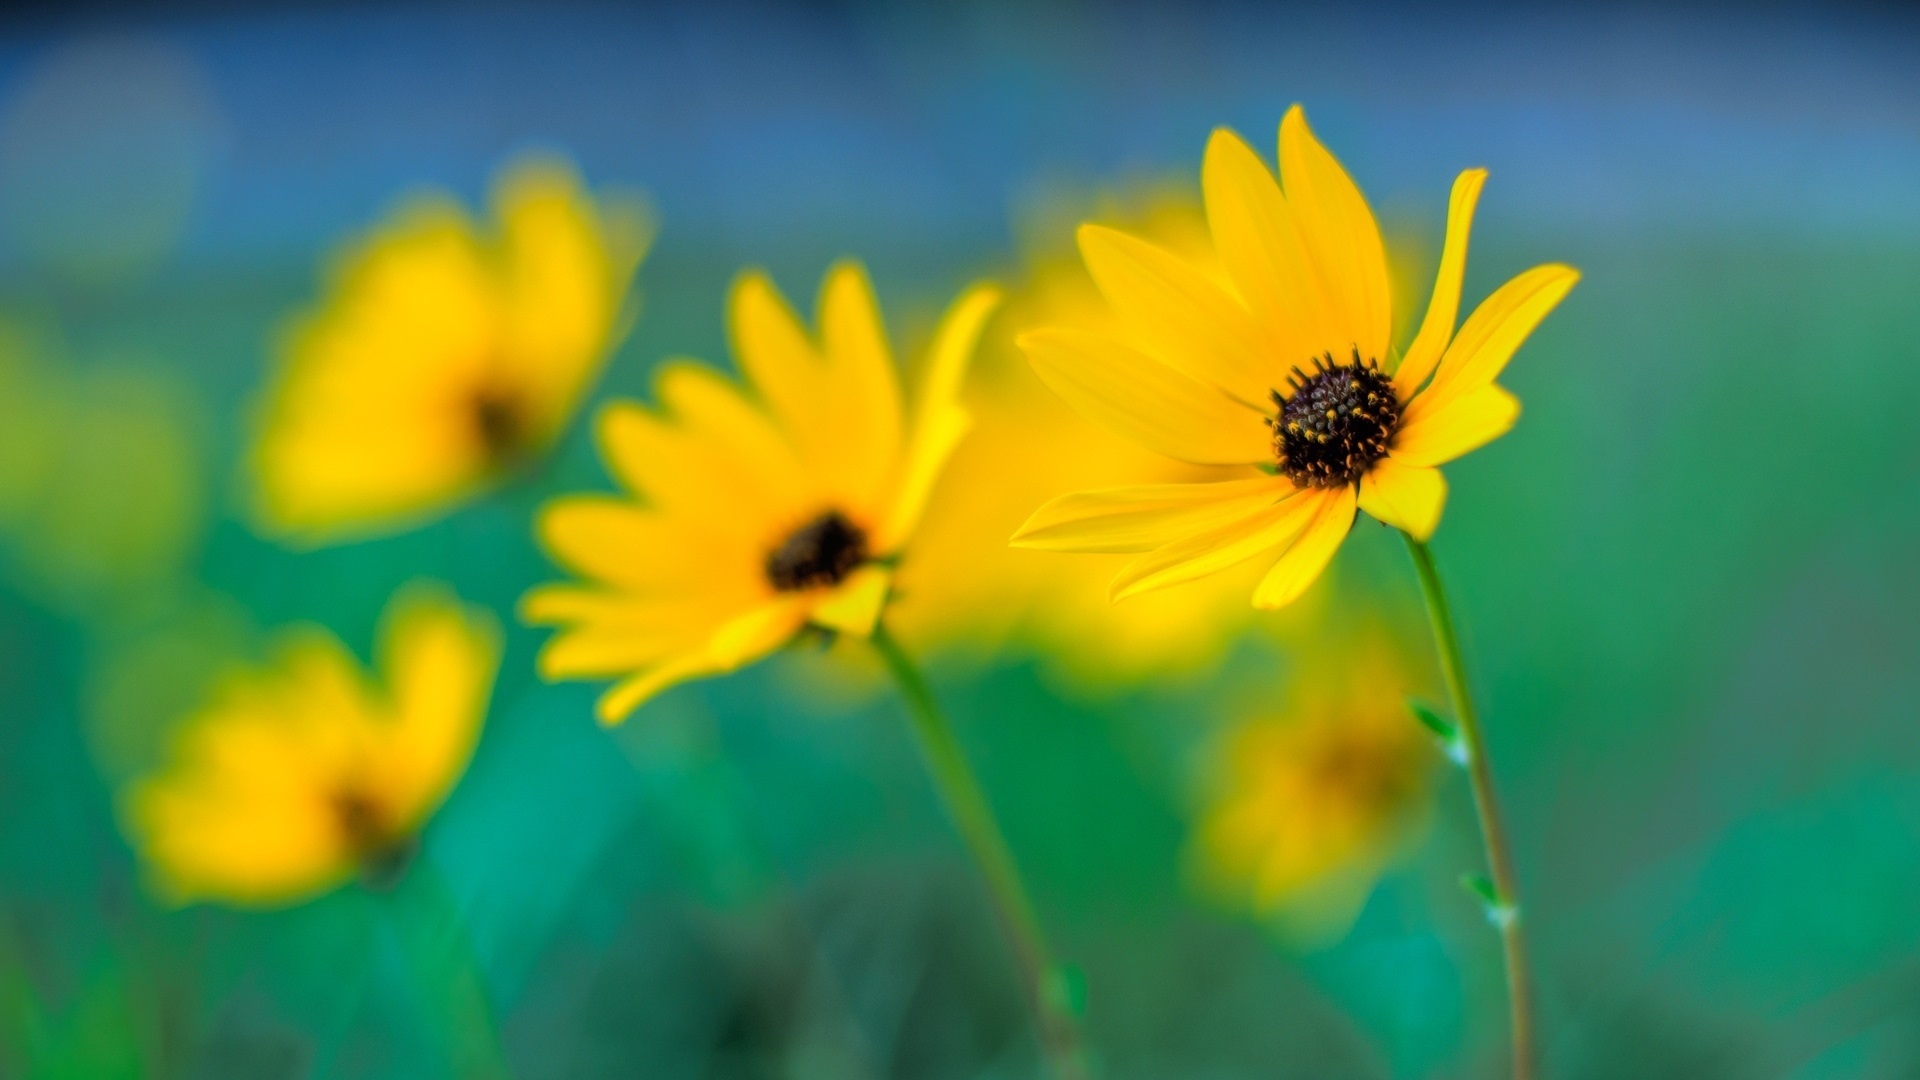 General 1920x1080 flowers nature plants blurred yellow green blue yellow flowers